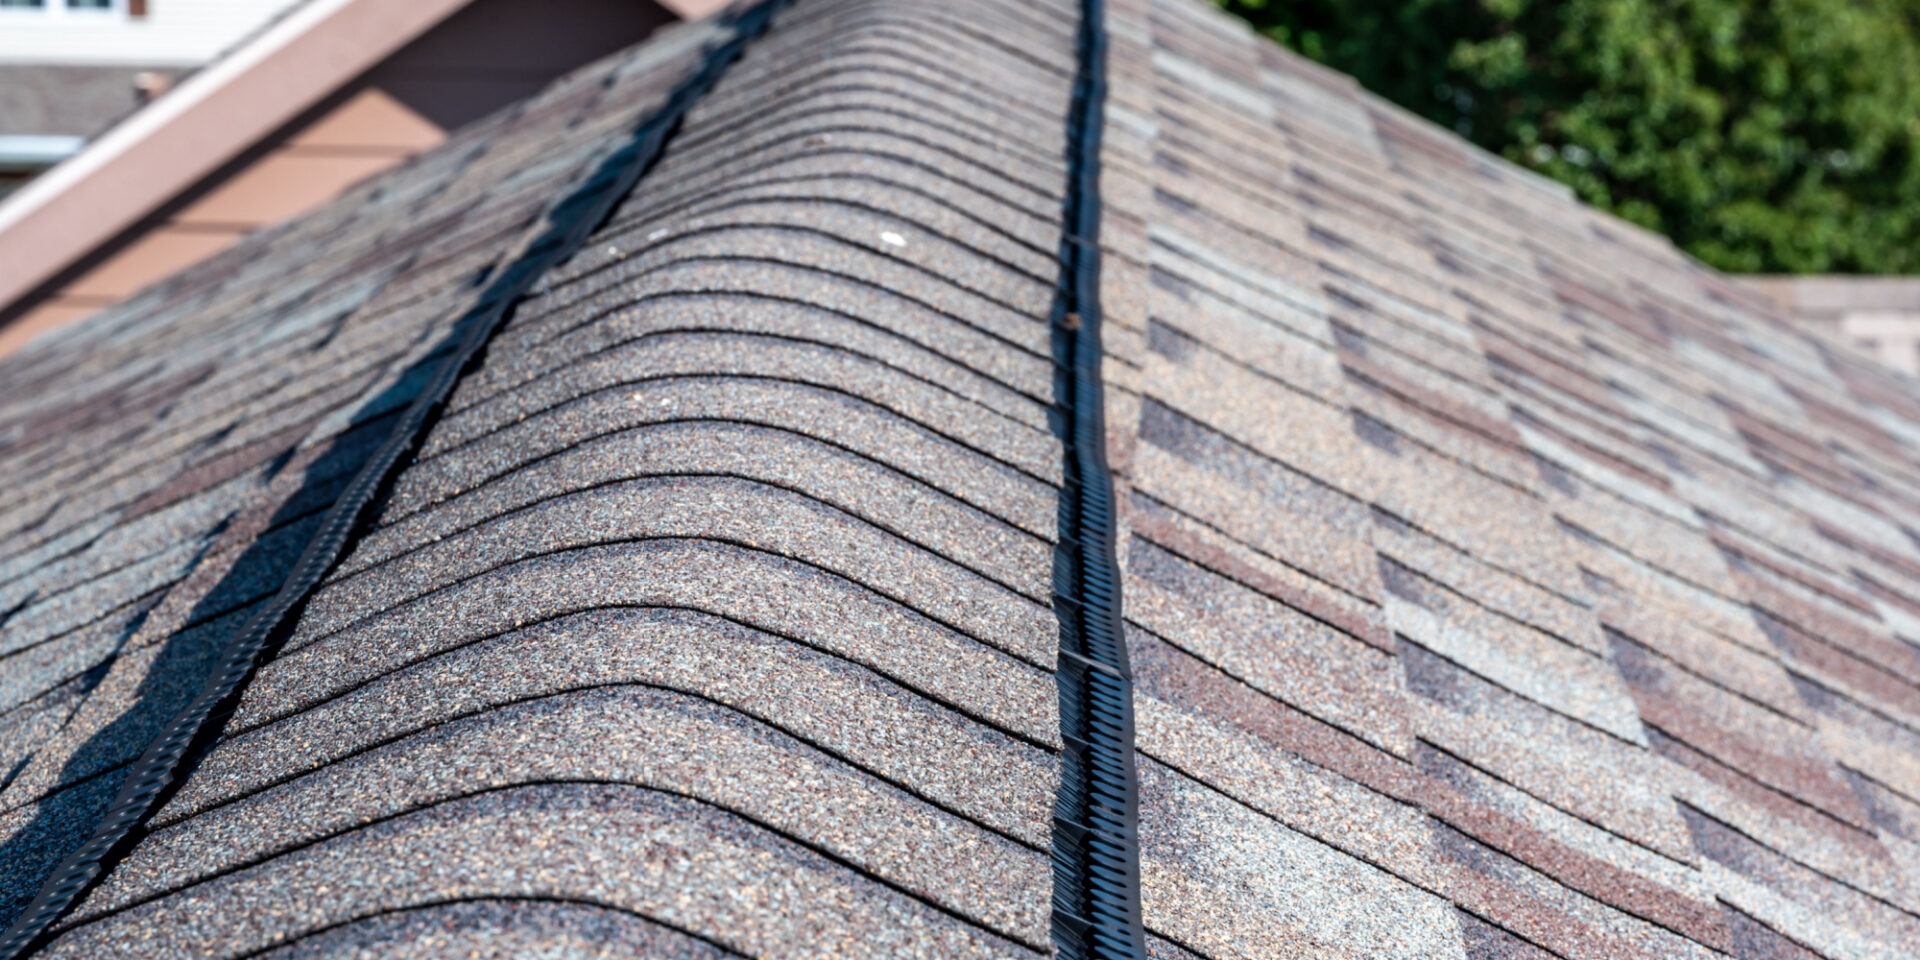 Metal Roofing vs. Shingles - Pros and Cons